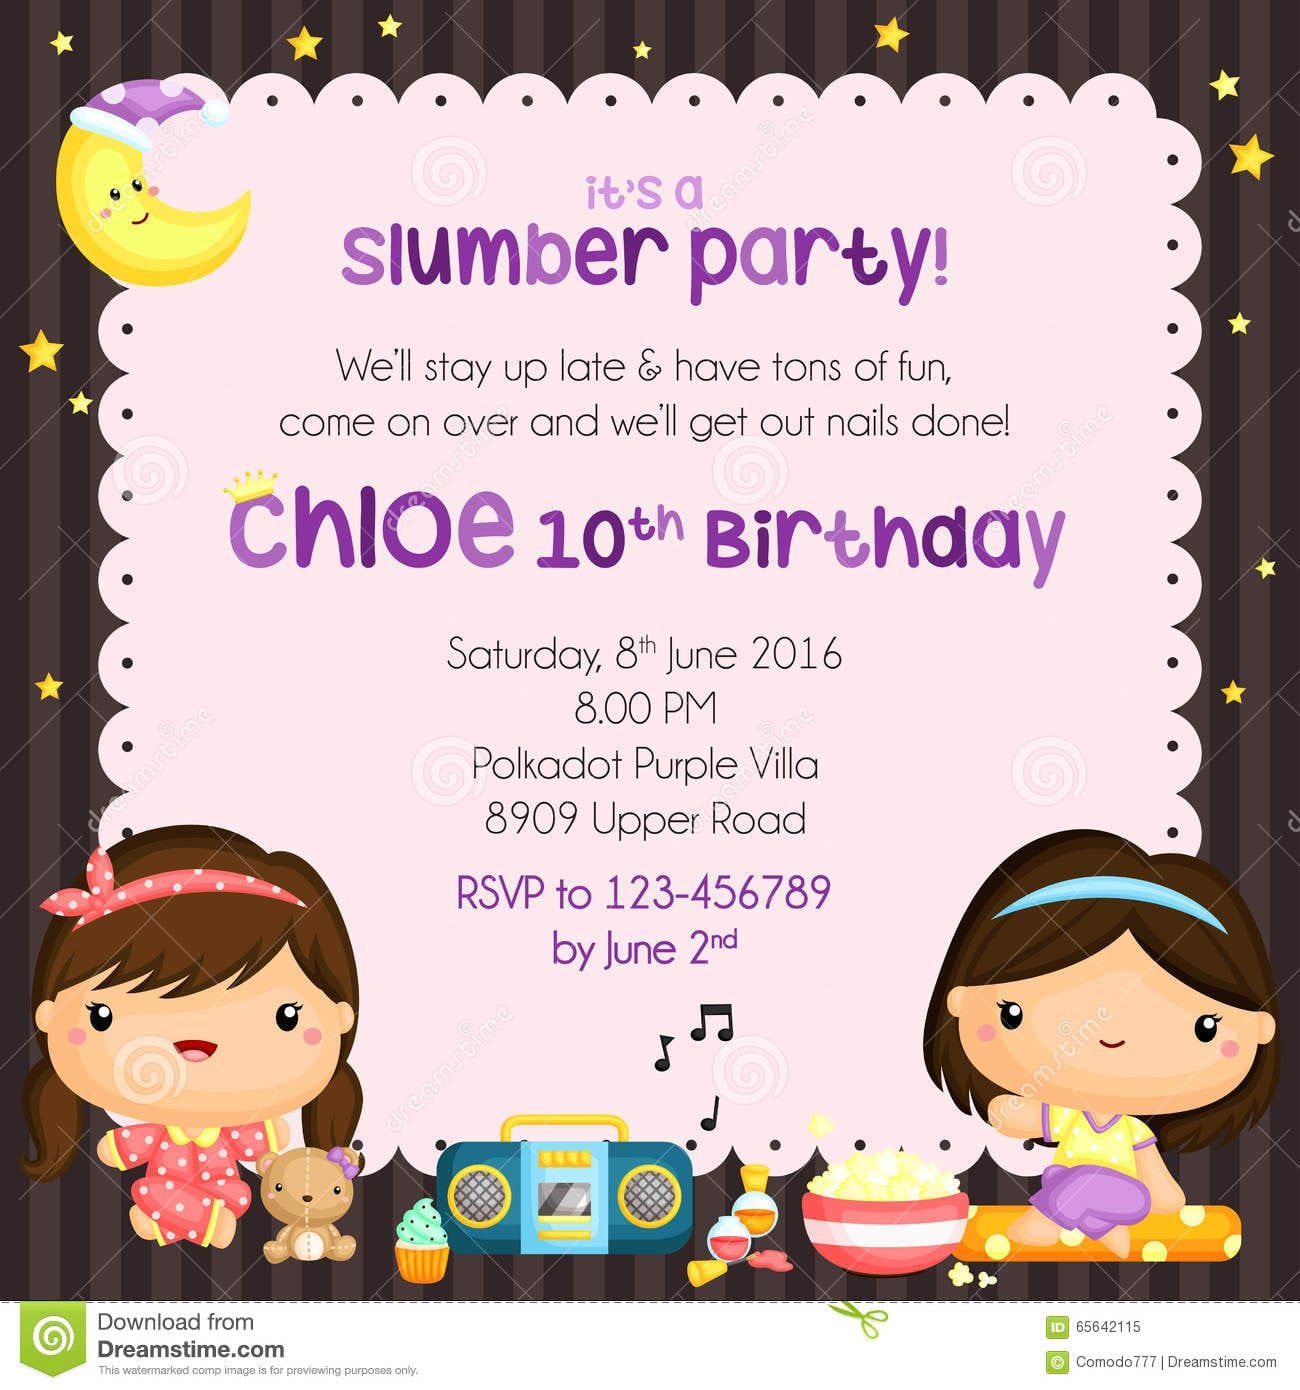 Invitation Cards For Birthday Party Ideas About Invitation Cards